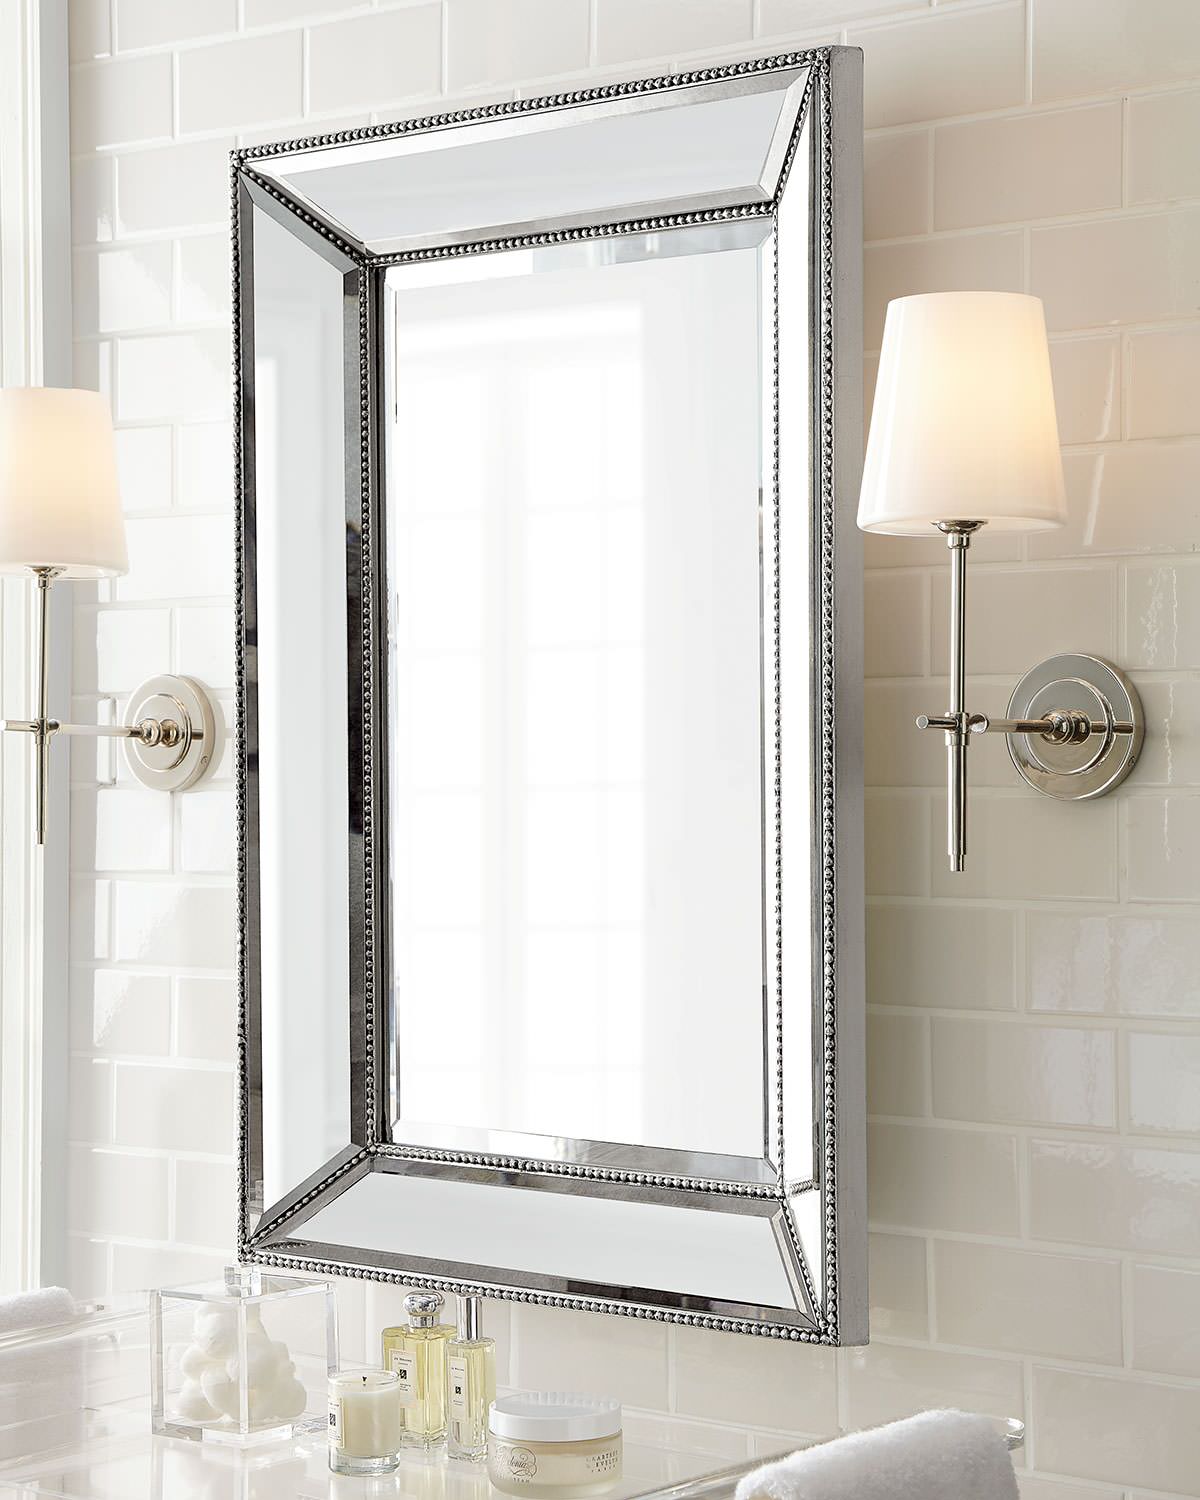 Visual Comfort Bryant Sconce with Polished-Nickel Finish - Bathroom -  Dallas - by Horchow | Houzz